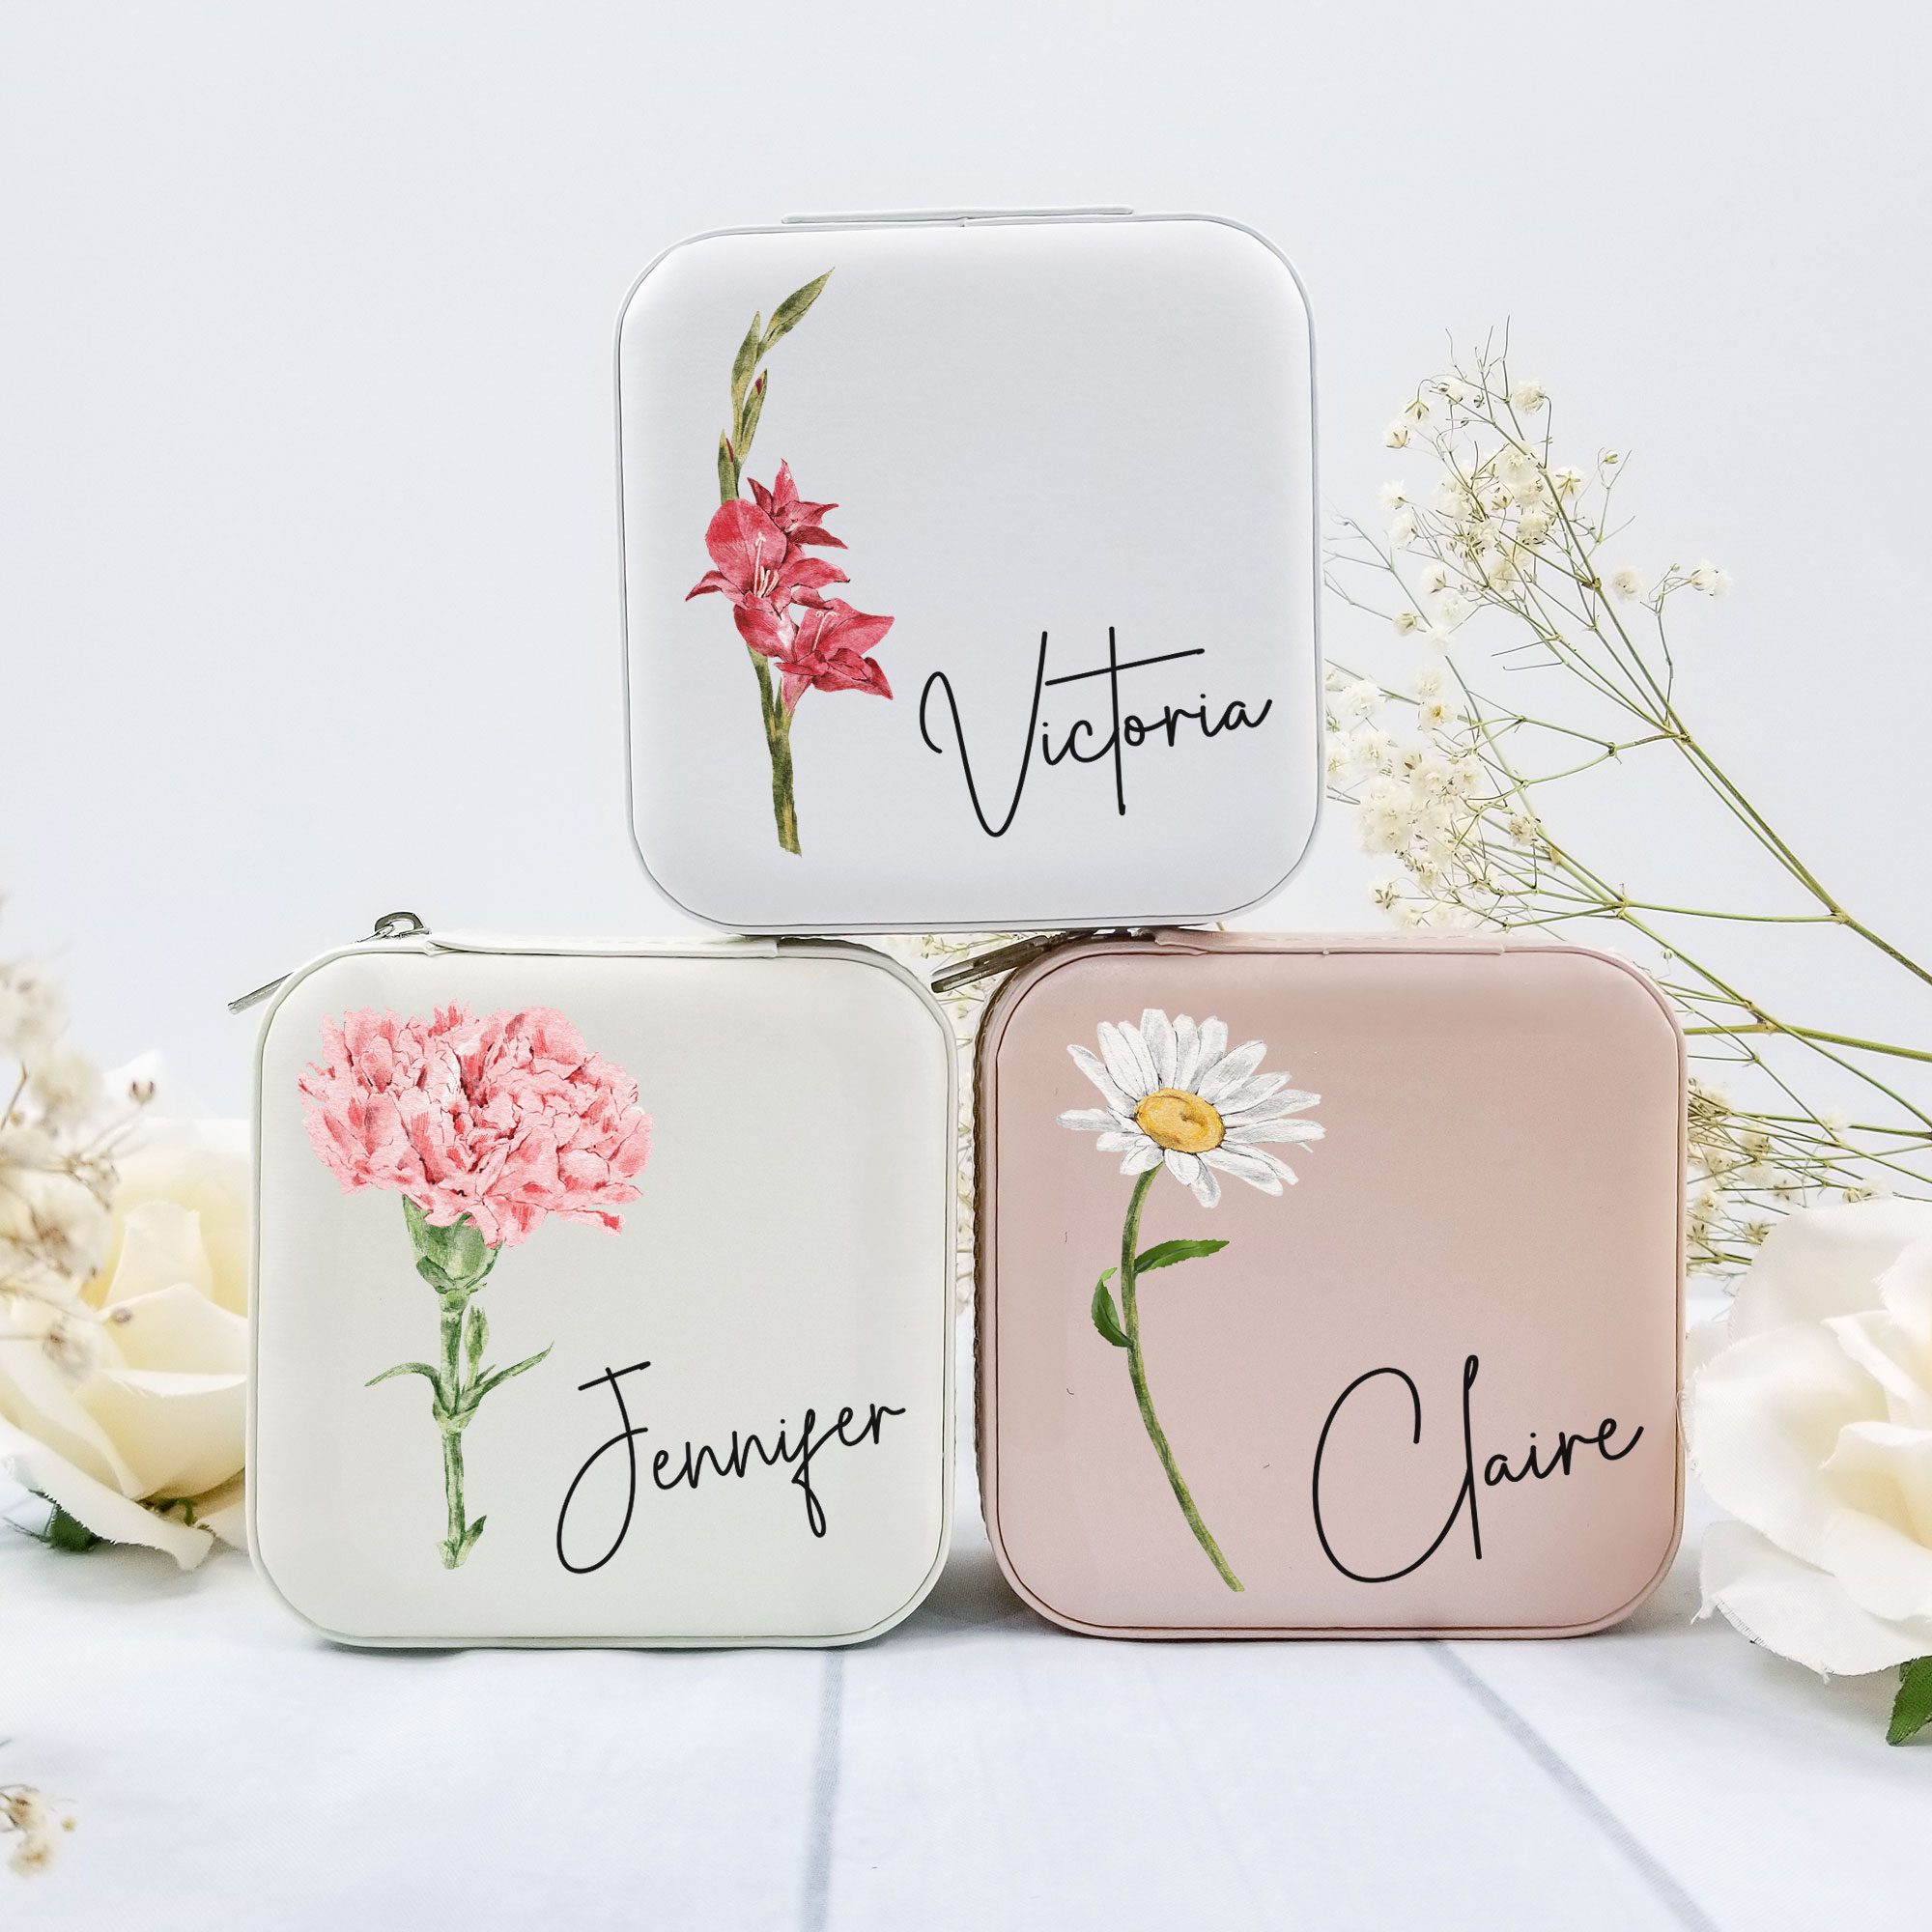 Personalized travel jewelry case with birth flower